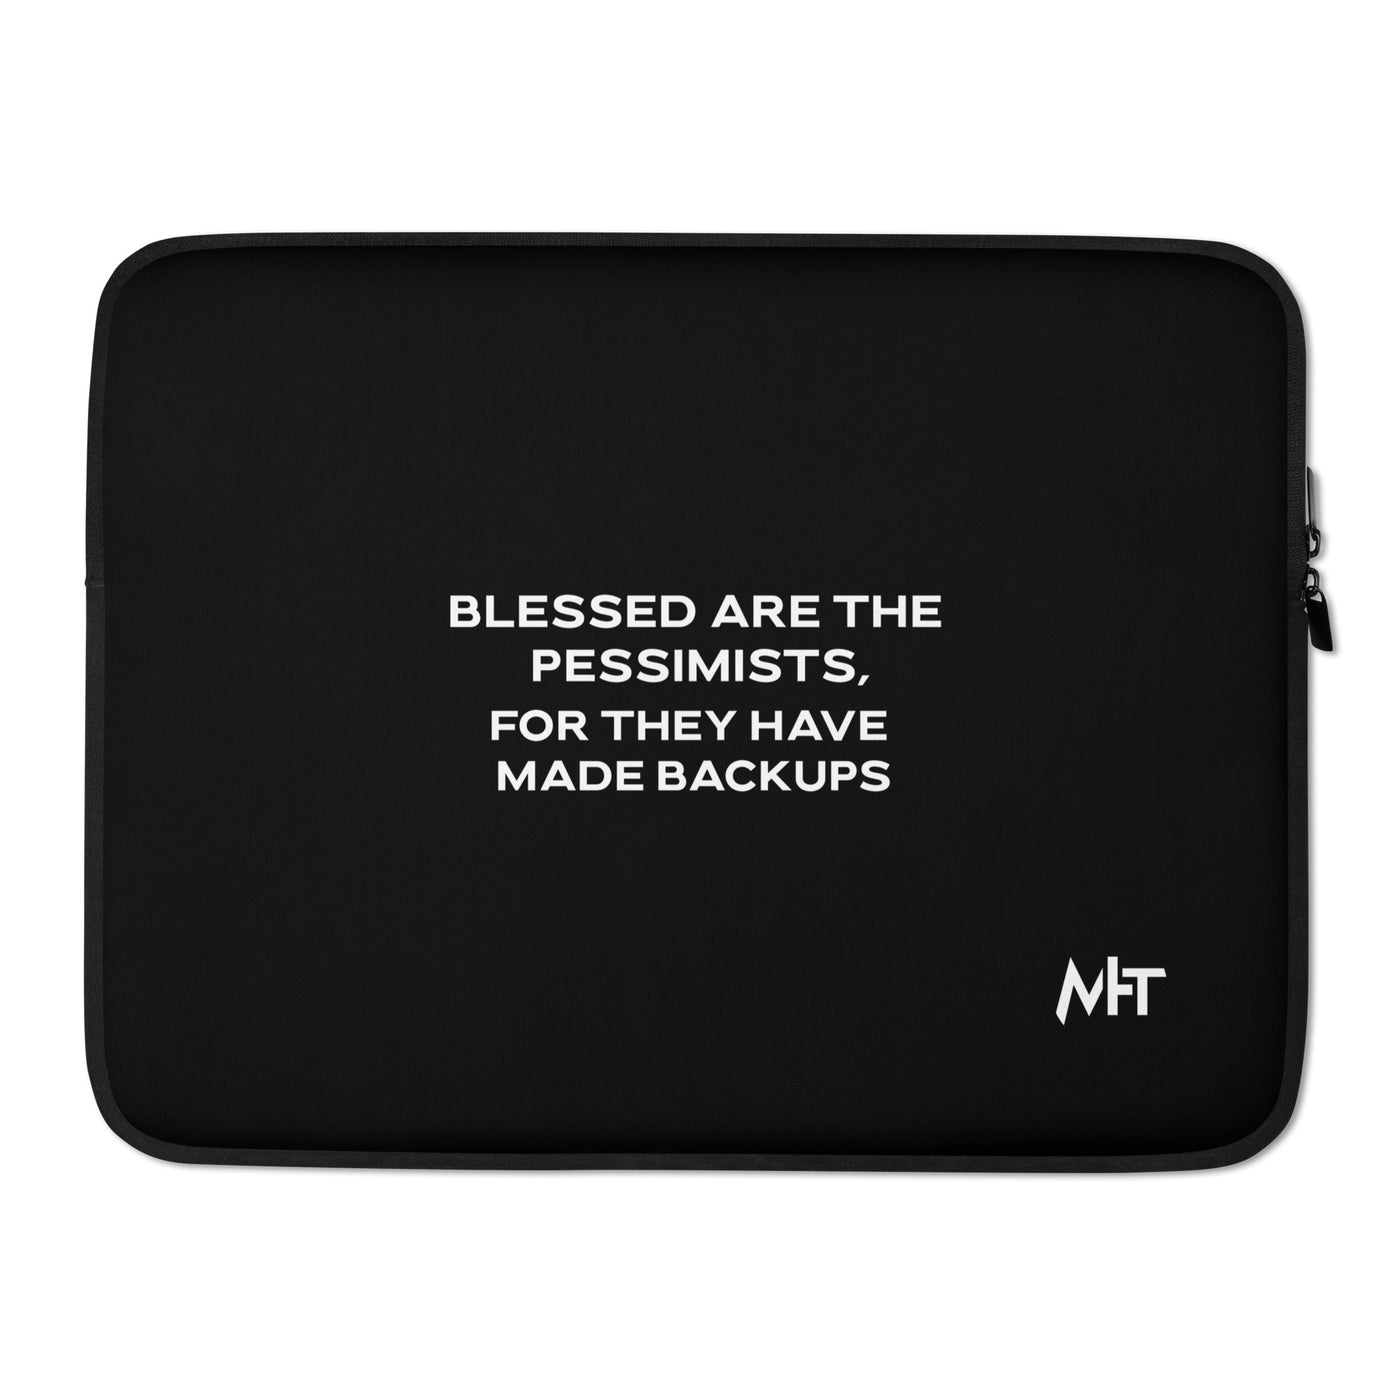 Blessed are the pessimists for they have made backups V2 - Laptop Sleeve